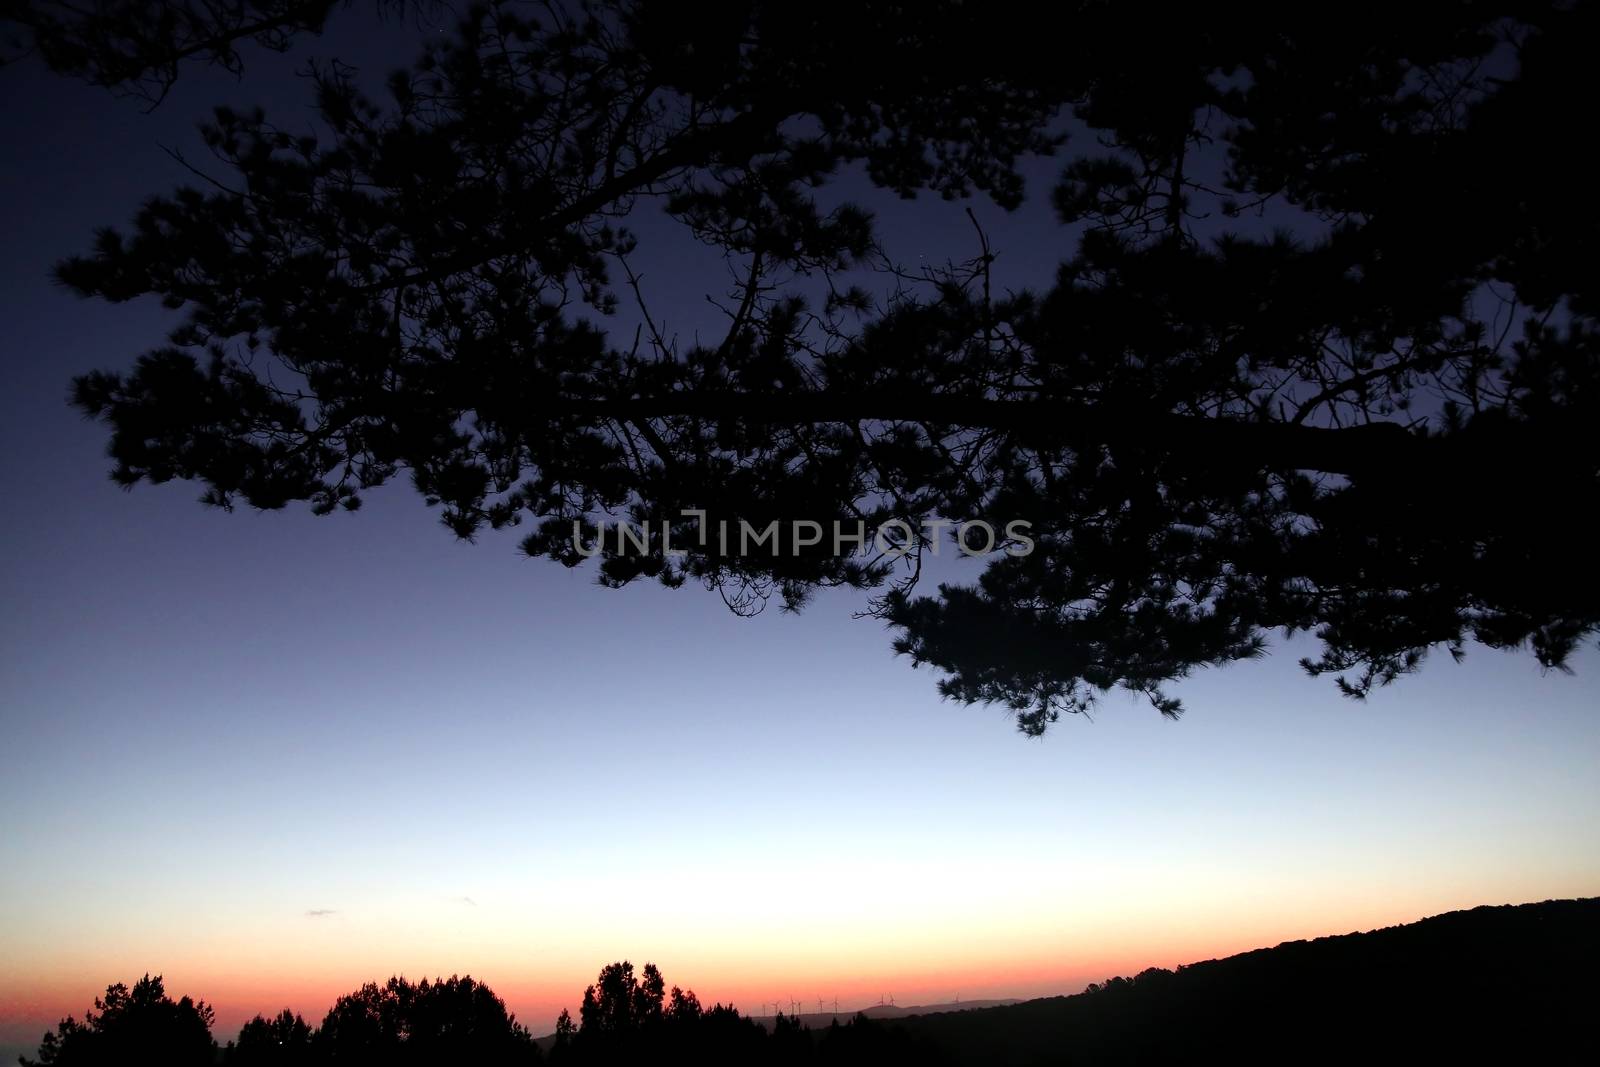 Sunset with a large tree silhouetted in the foreground